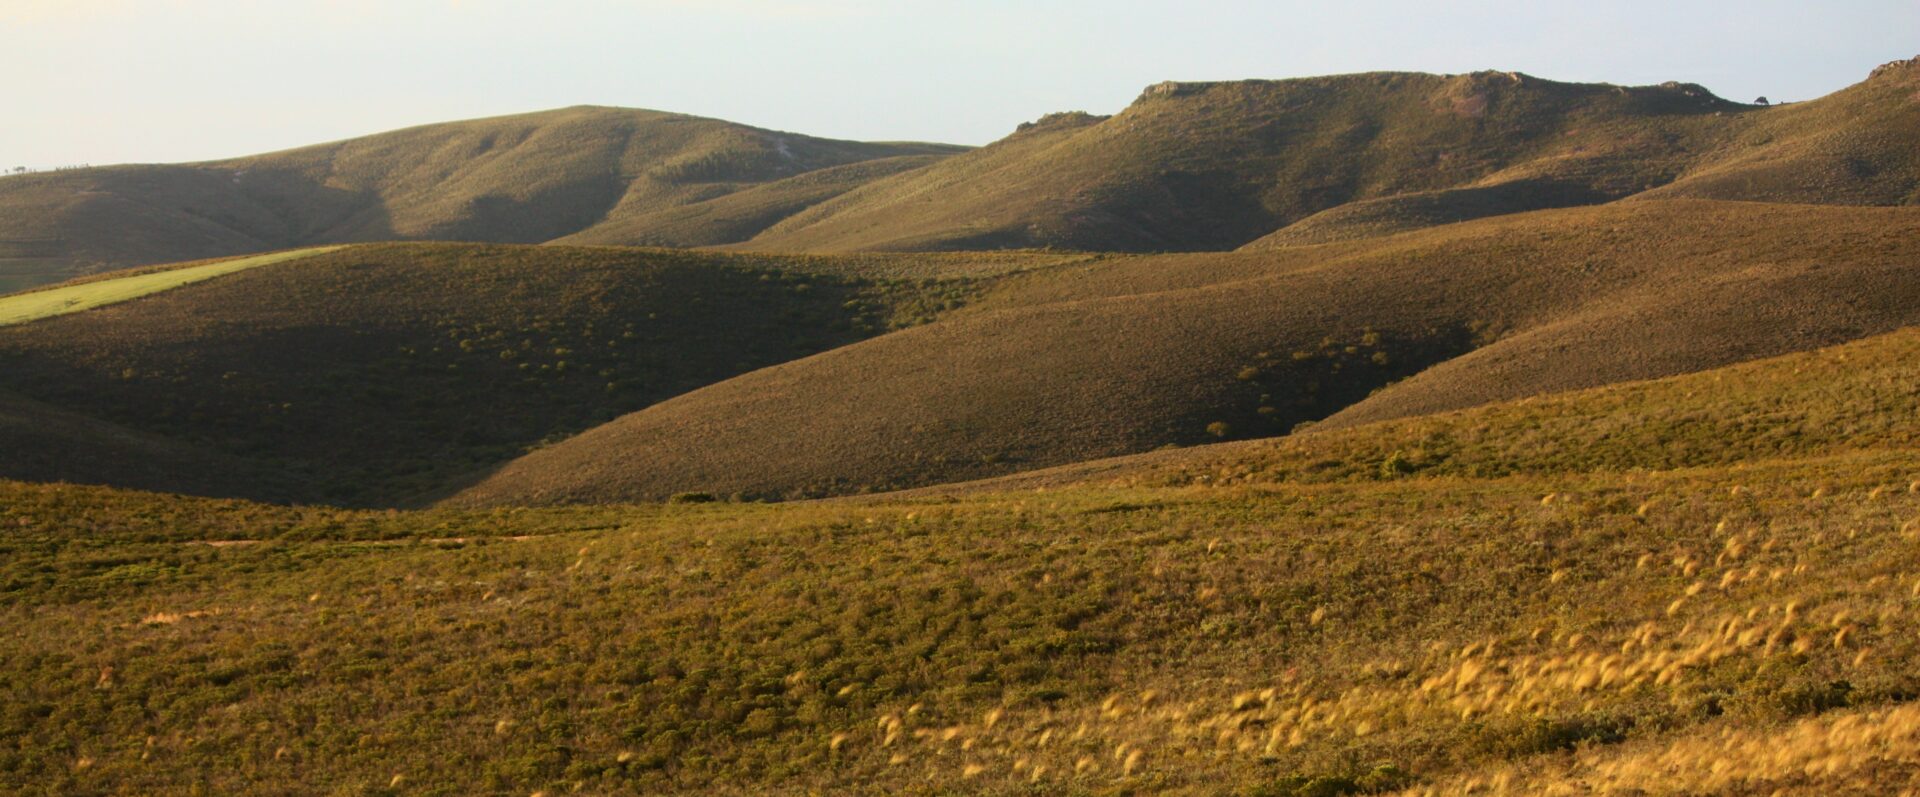 Rolling hills of muted brown vegetation